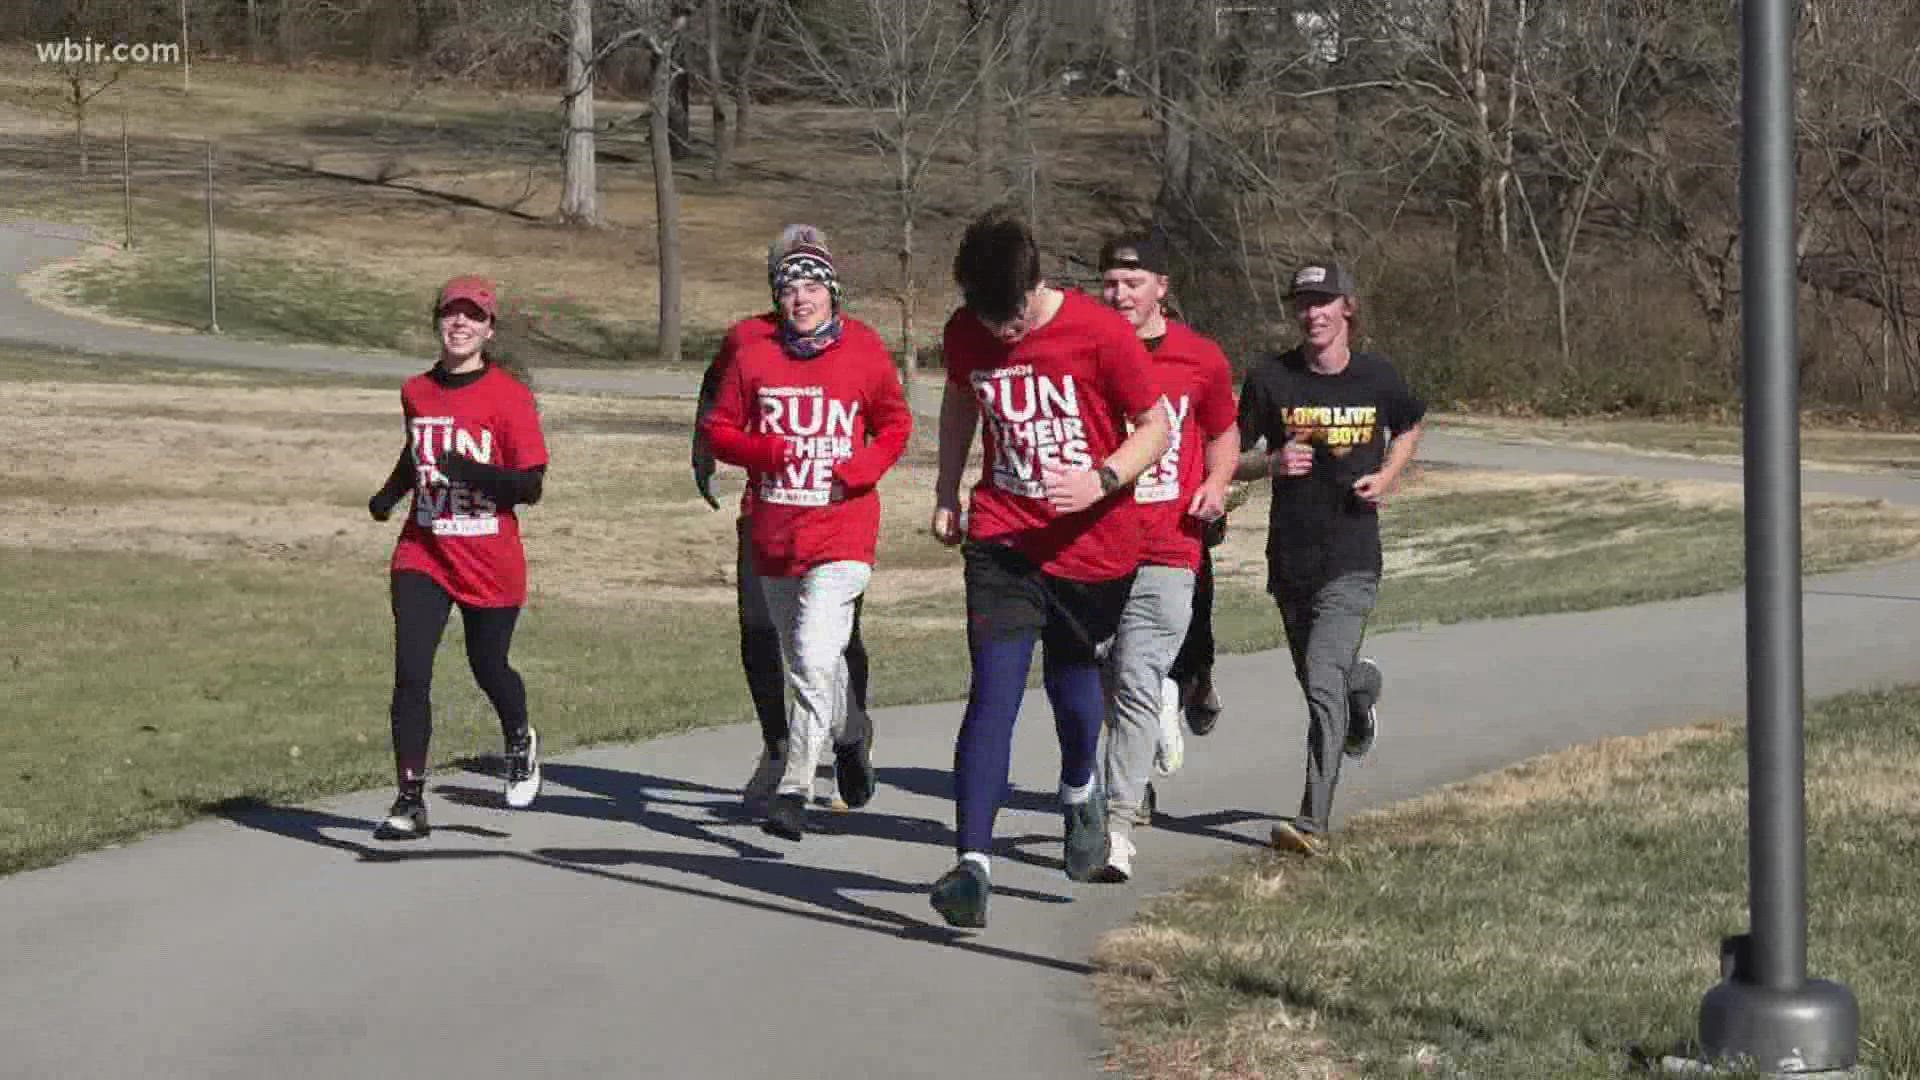 The 9th Annual Run 4 Their Lives 5K was canceled due to unfavorable winter weather conditions and ice on the running route.